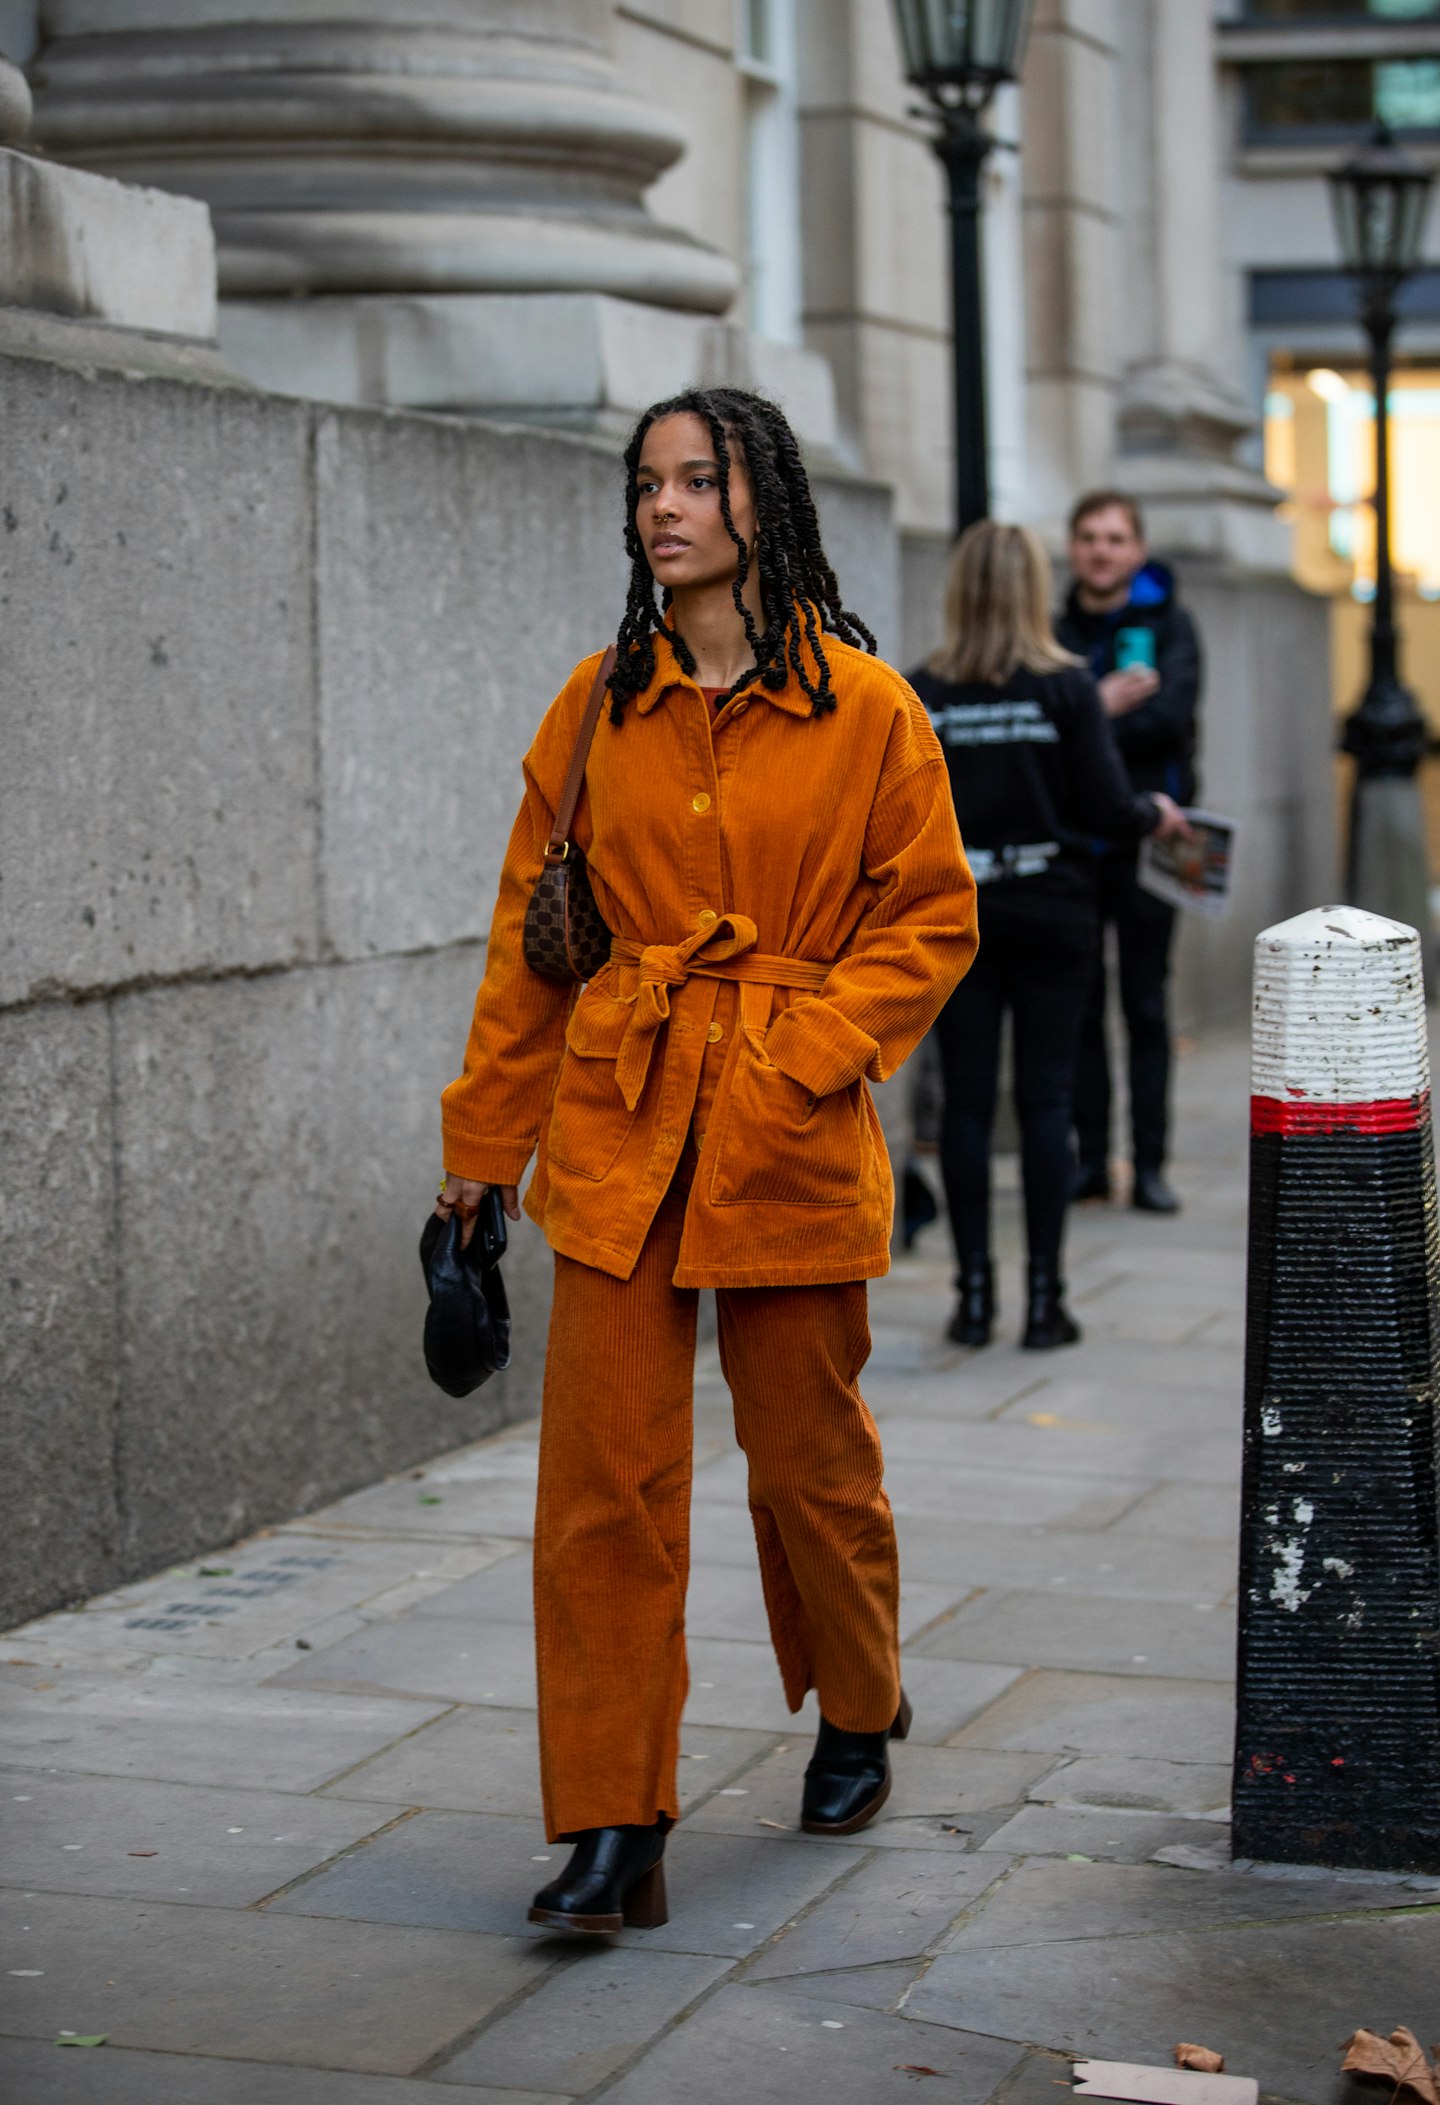 This street-styler's tangerine co-ord was a cheerful moment outside Rixo